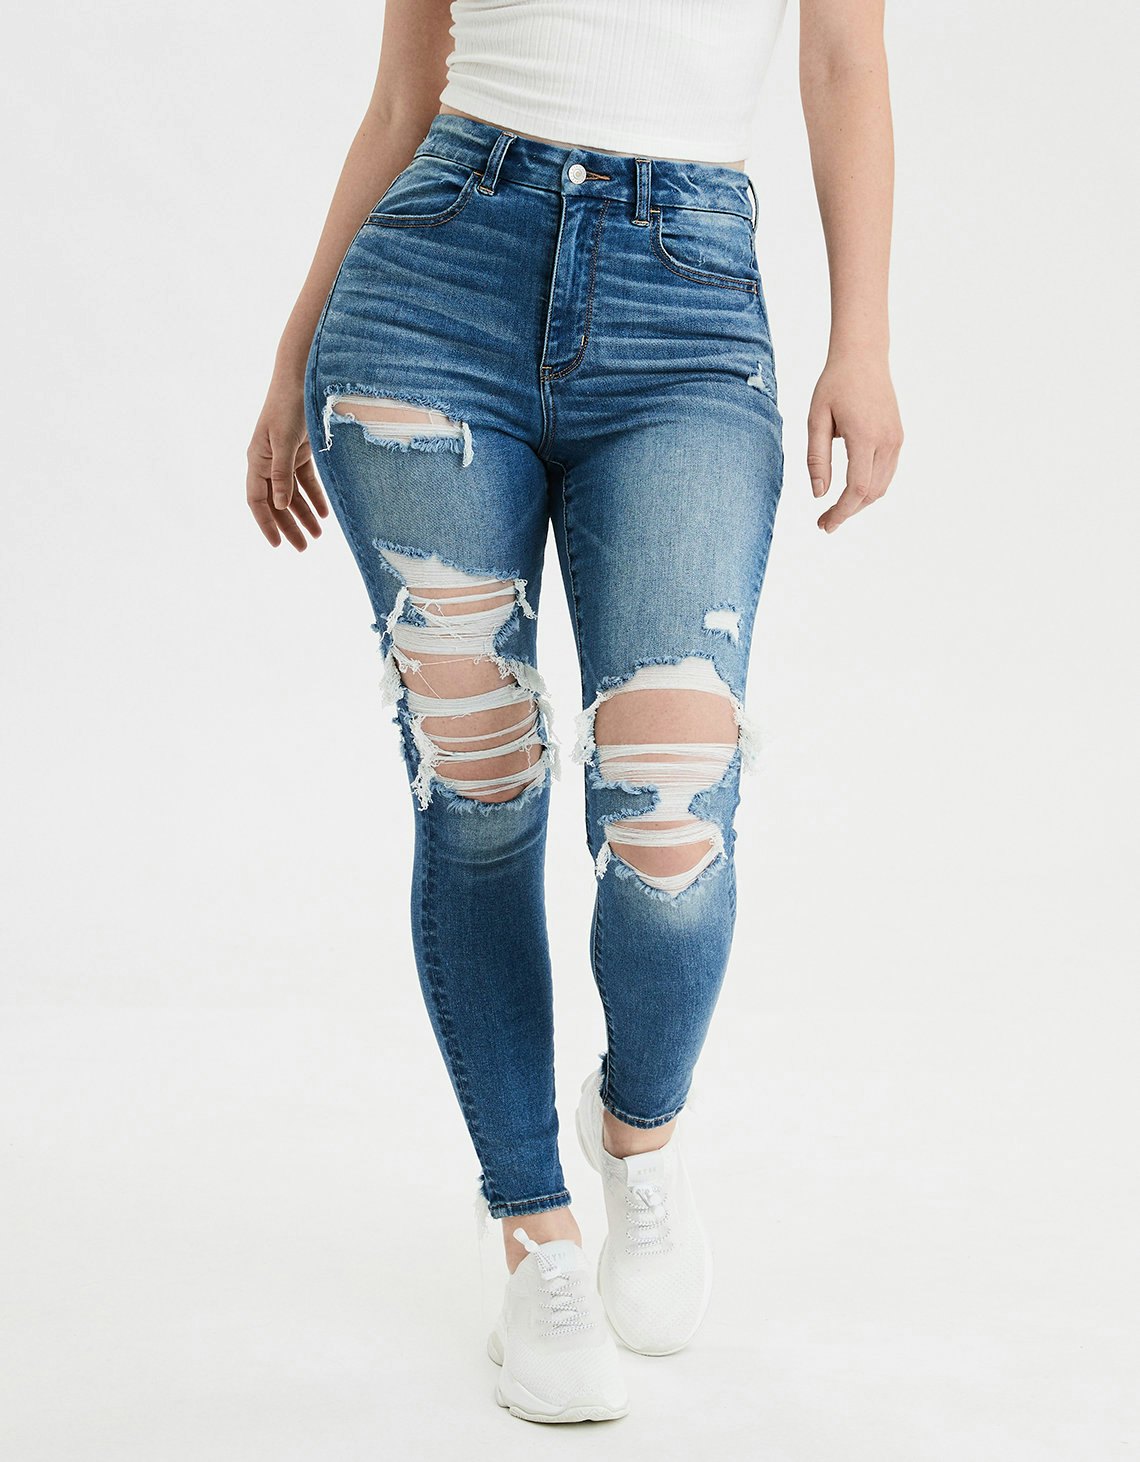 american eagle curvy jeans review